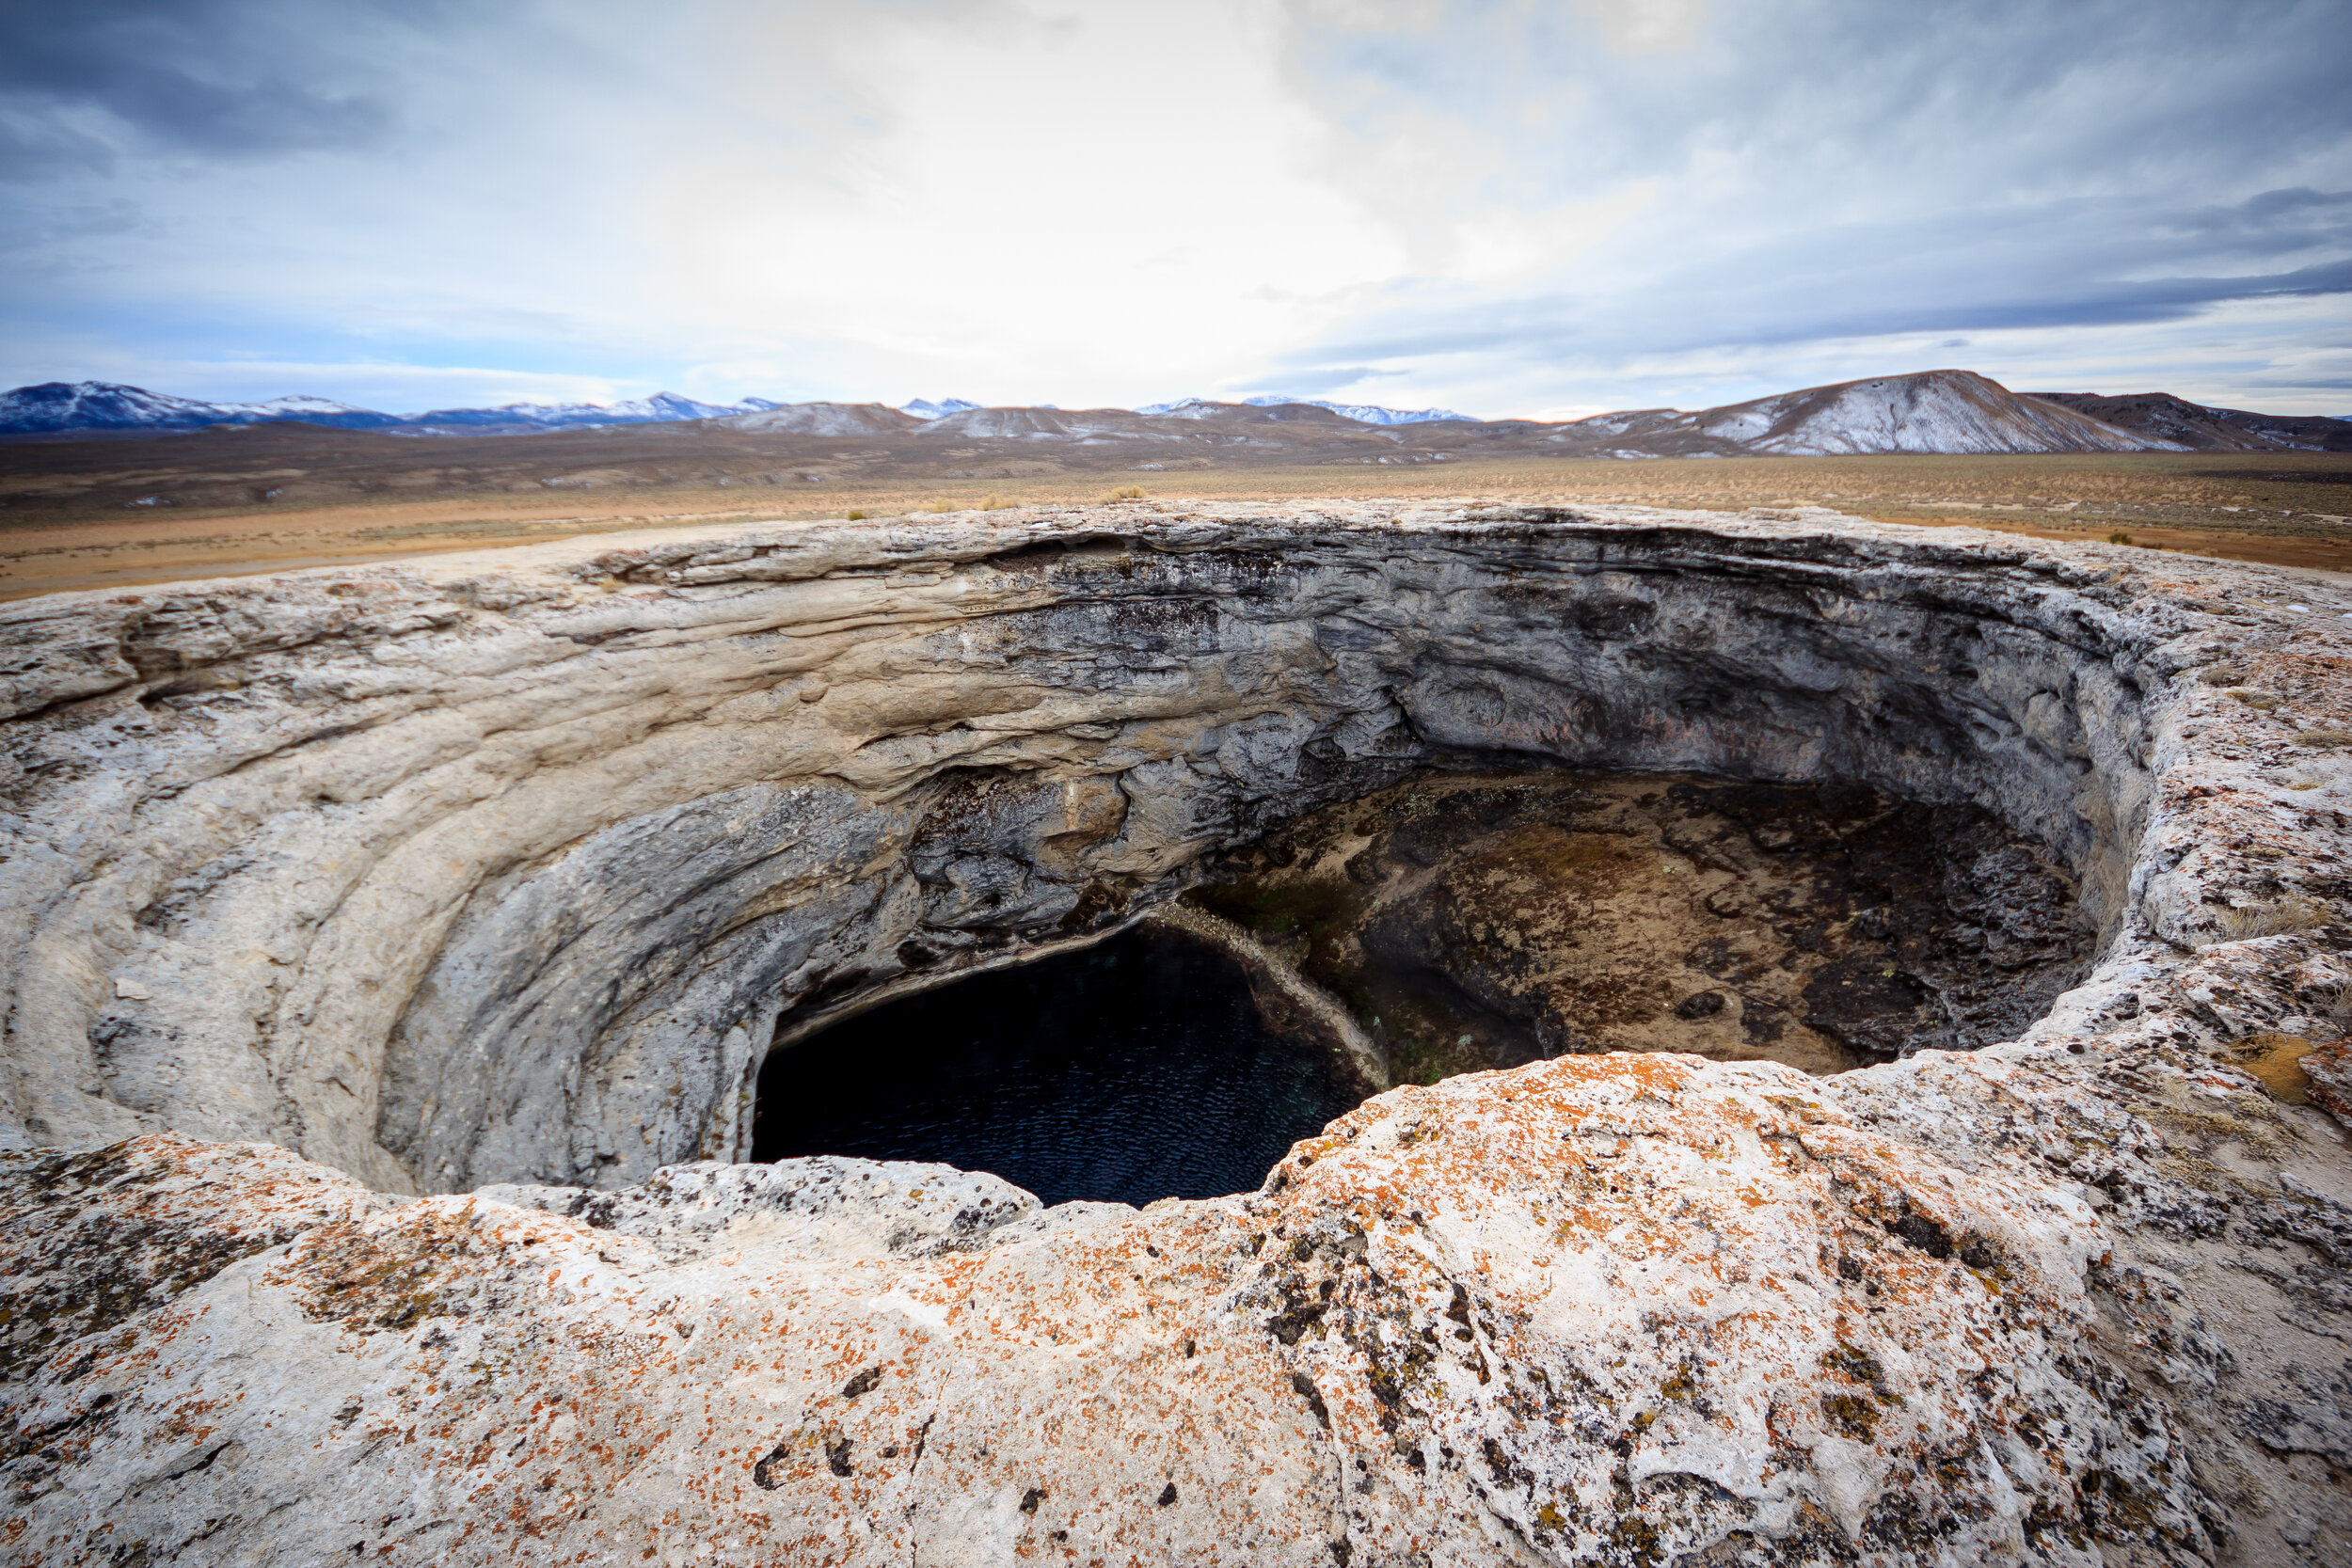 Diana's Punchbowl, also called the Devil's Cauldron. Nevada